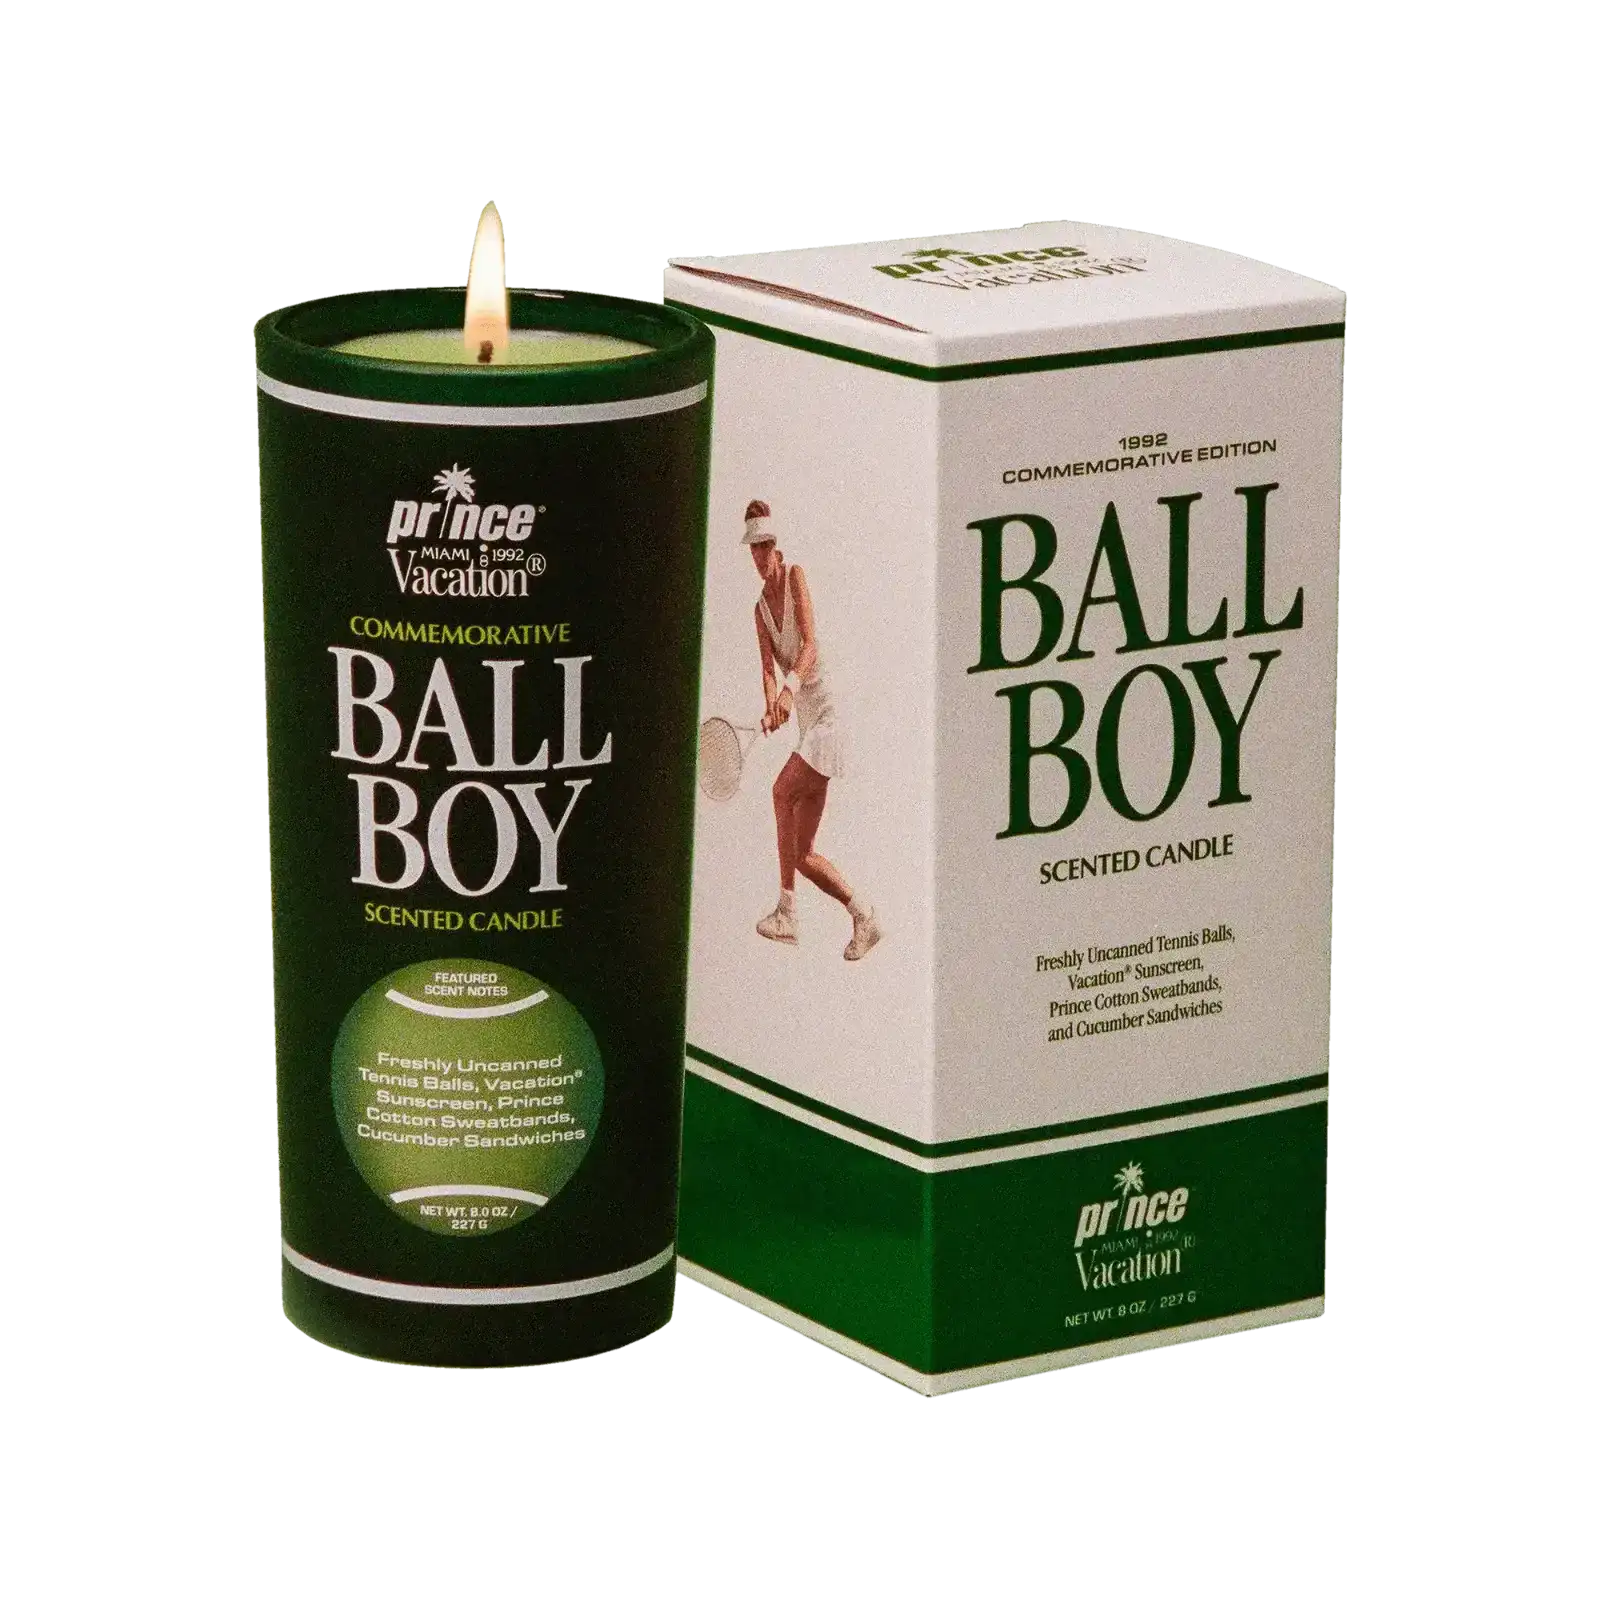 Image of Prince® x Vacation® Ball Boy Scented Candle